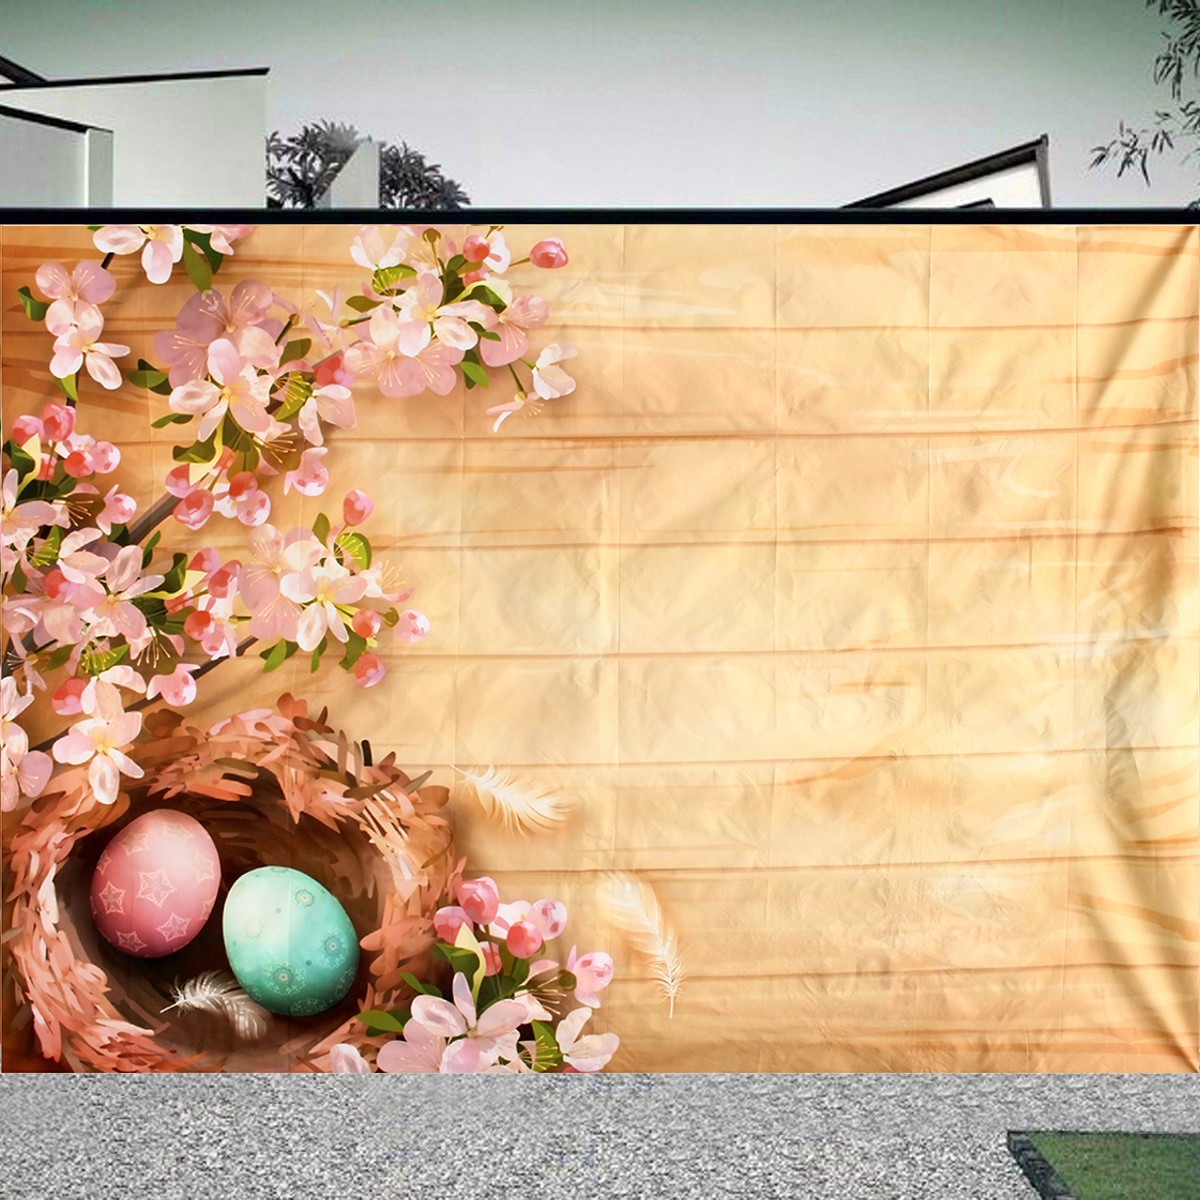 7x5FT-Blooms-Flower-Easter-Eggs-Photography-Backdrop-Studio-Prop-Background-1392188-3